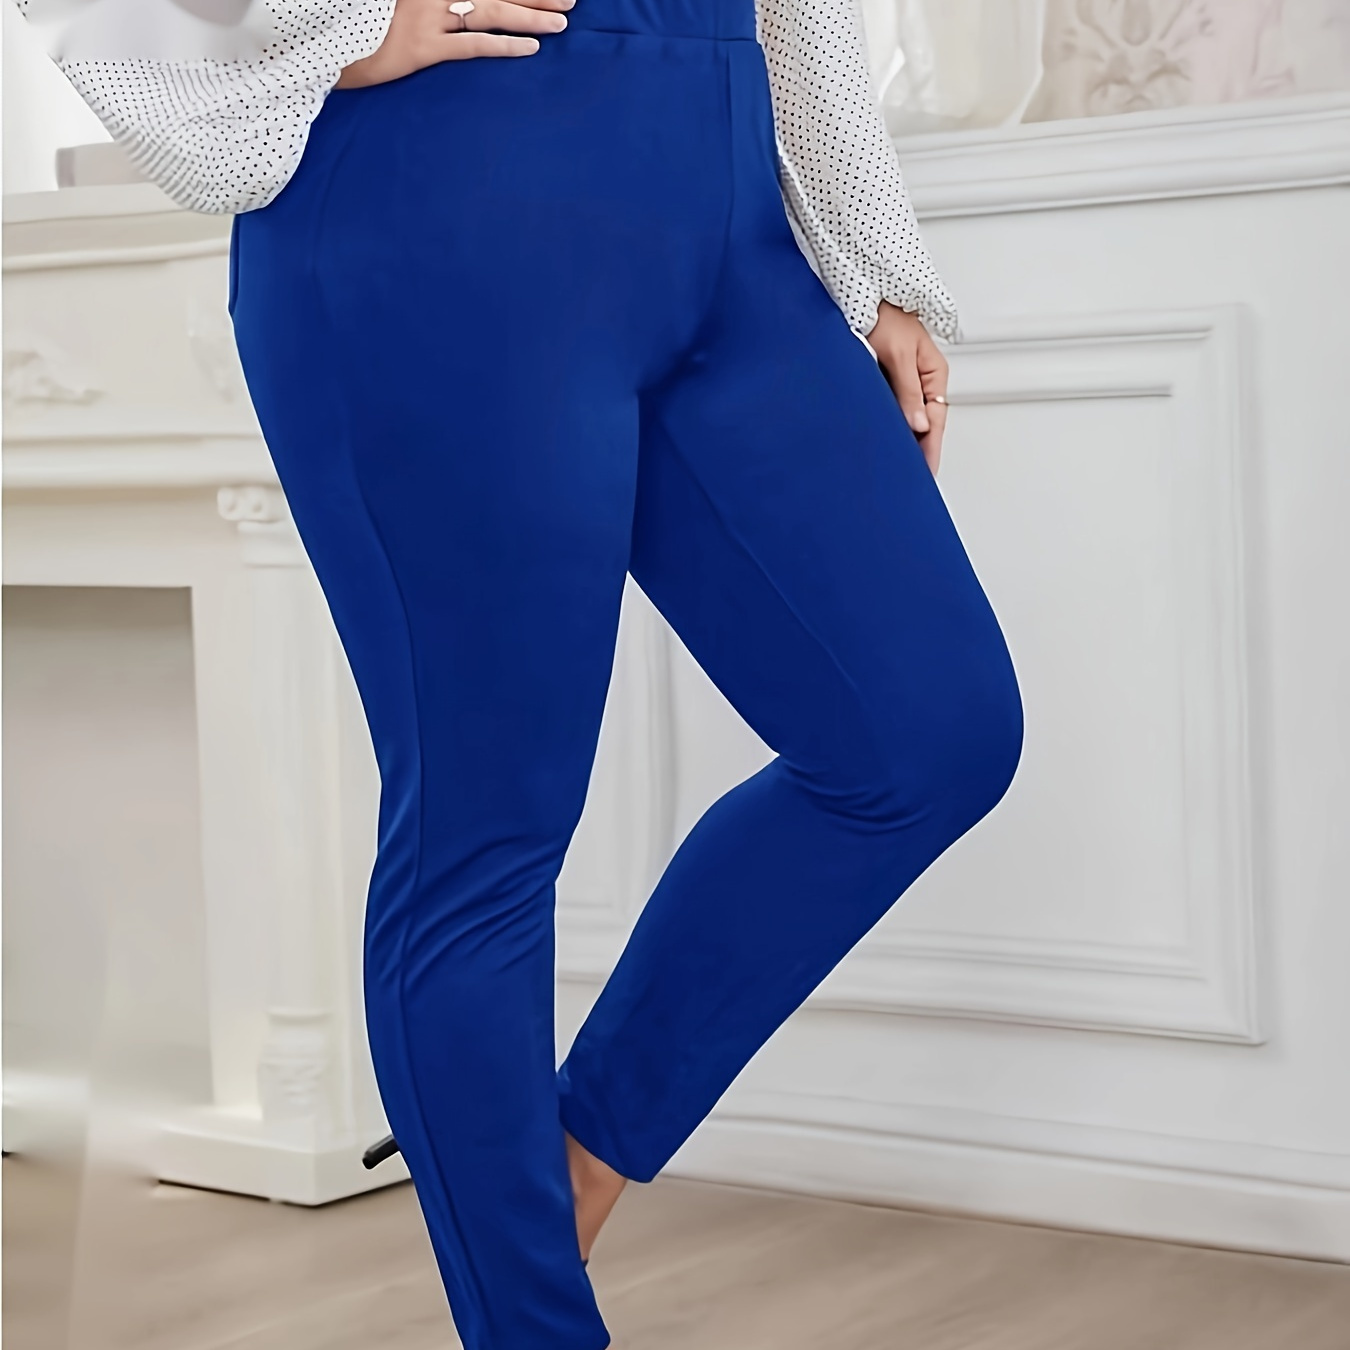 

Plus Size Solid Pocket Leggings, Casual High Waist Stretchy Leggings, Women's Plus Size Clothing